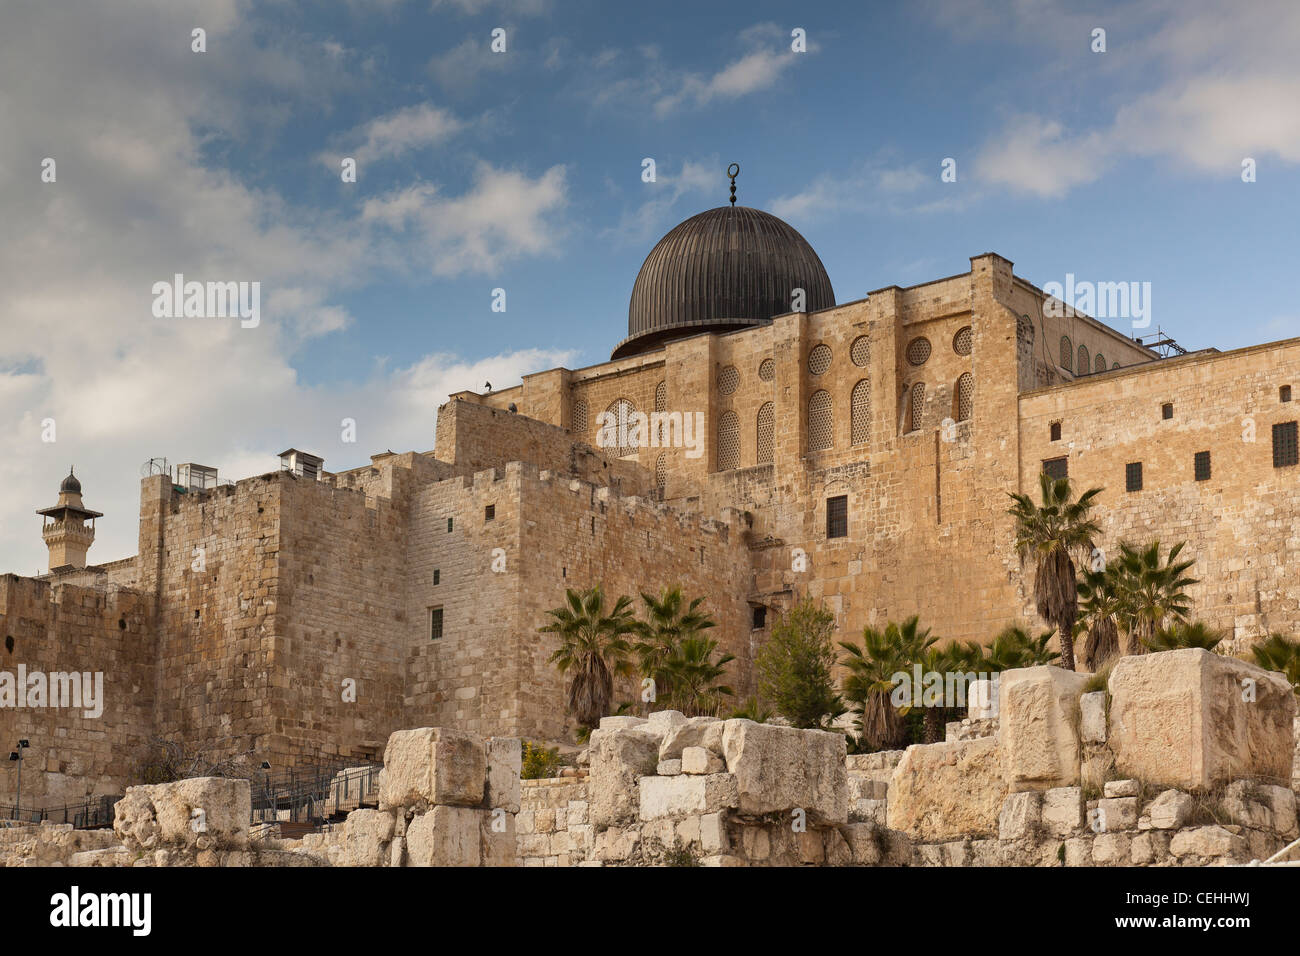 Al Aqsa mosque in the Old City of Jerusalem in Israel Stock Photo